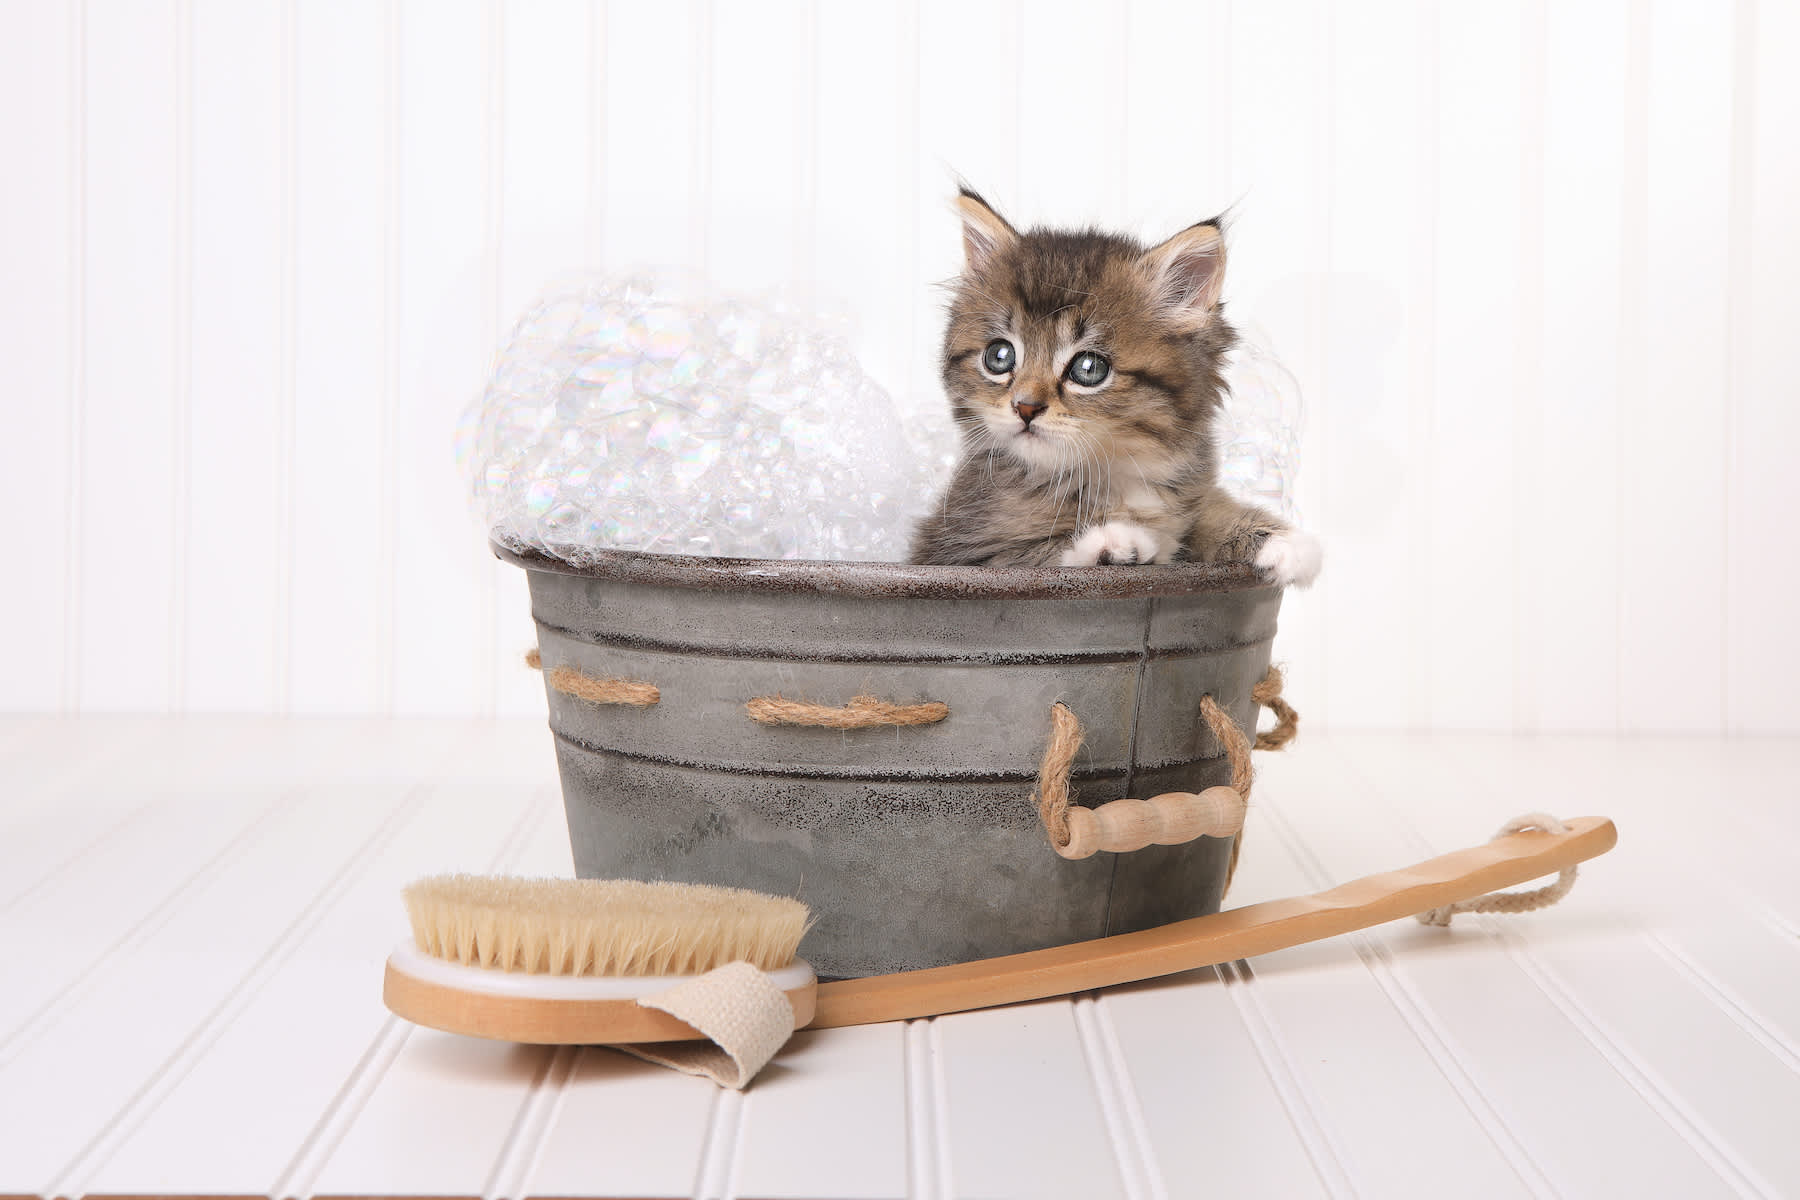 Cat Dandruff: Why Your Cat Has It & How To Get Rid Of It